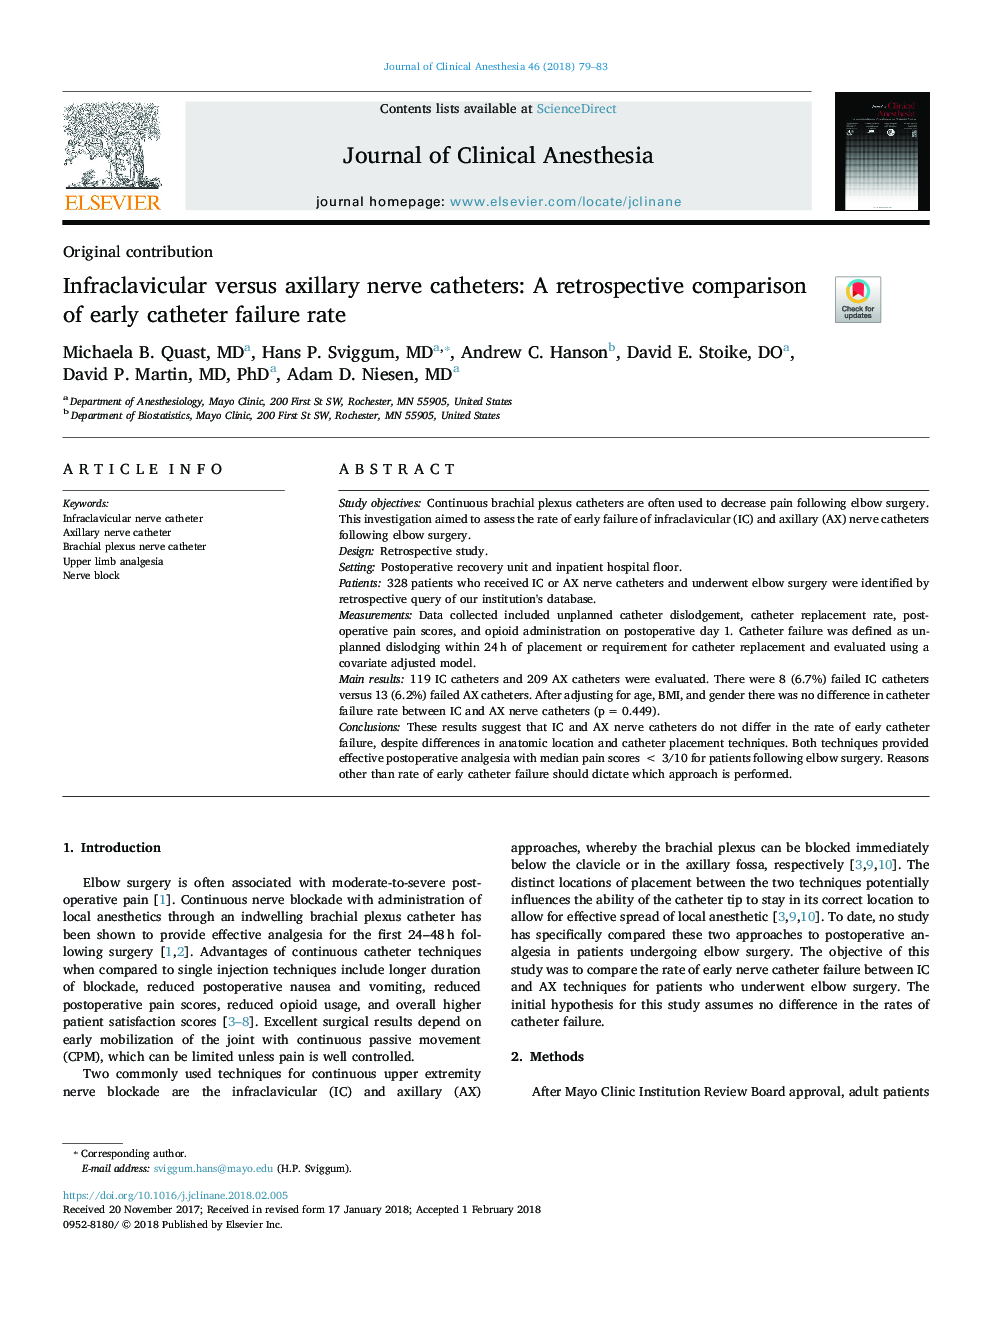 Infraclavicular versus axillary nerve catheters: A retrospective comparison of early catheter failure rate